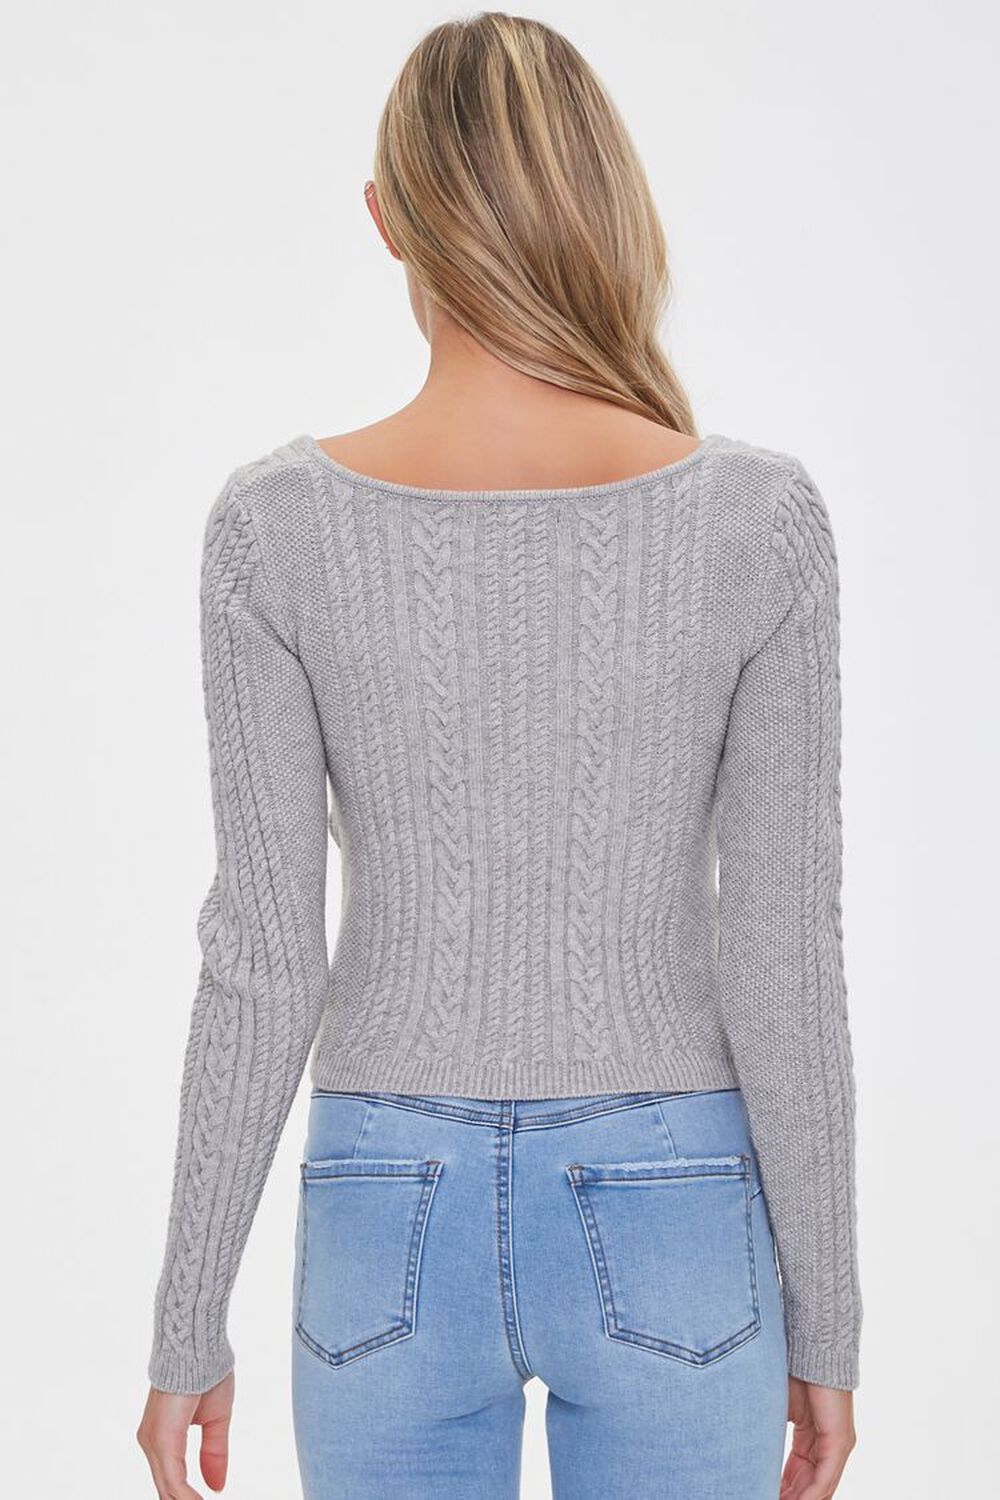 HEATHER GREY Sweetheart Cable Knit Sweater, image 3